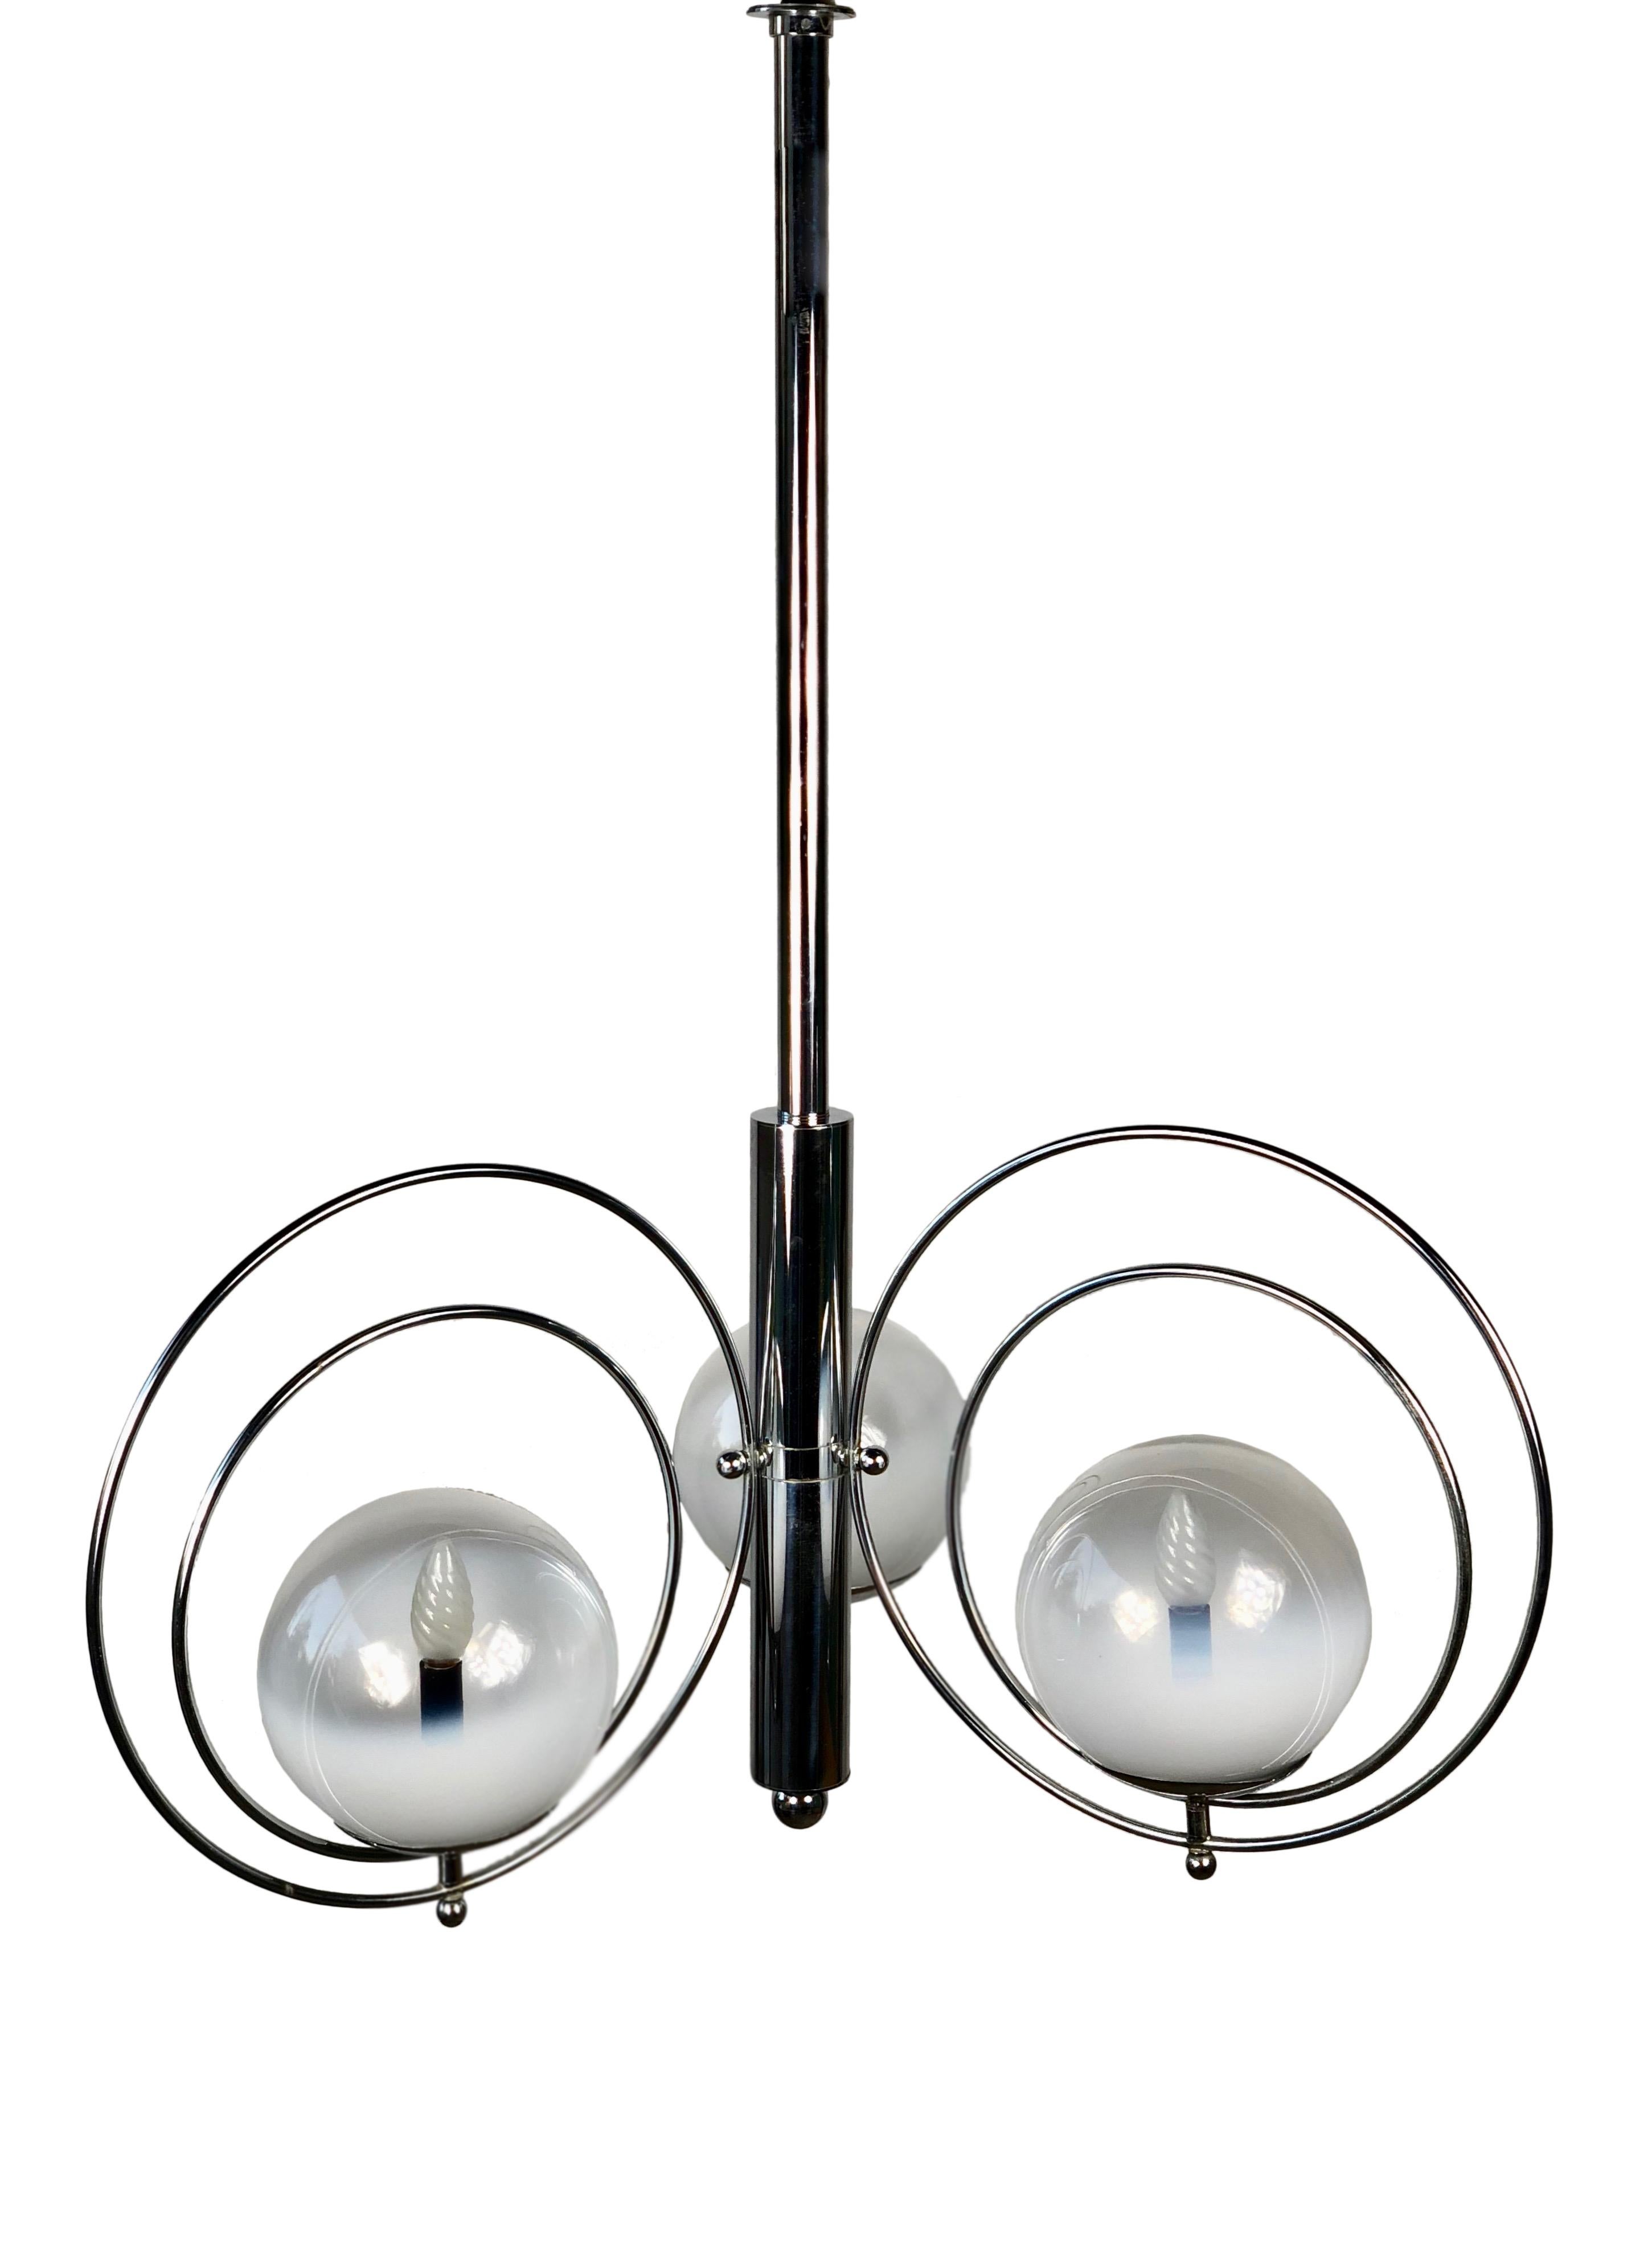 Chandelier featuring three Murano glass balls wrapped in two chrome rings with a chrome pendant. Beautiful and rare example of 1970s Italian design.